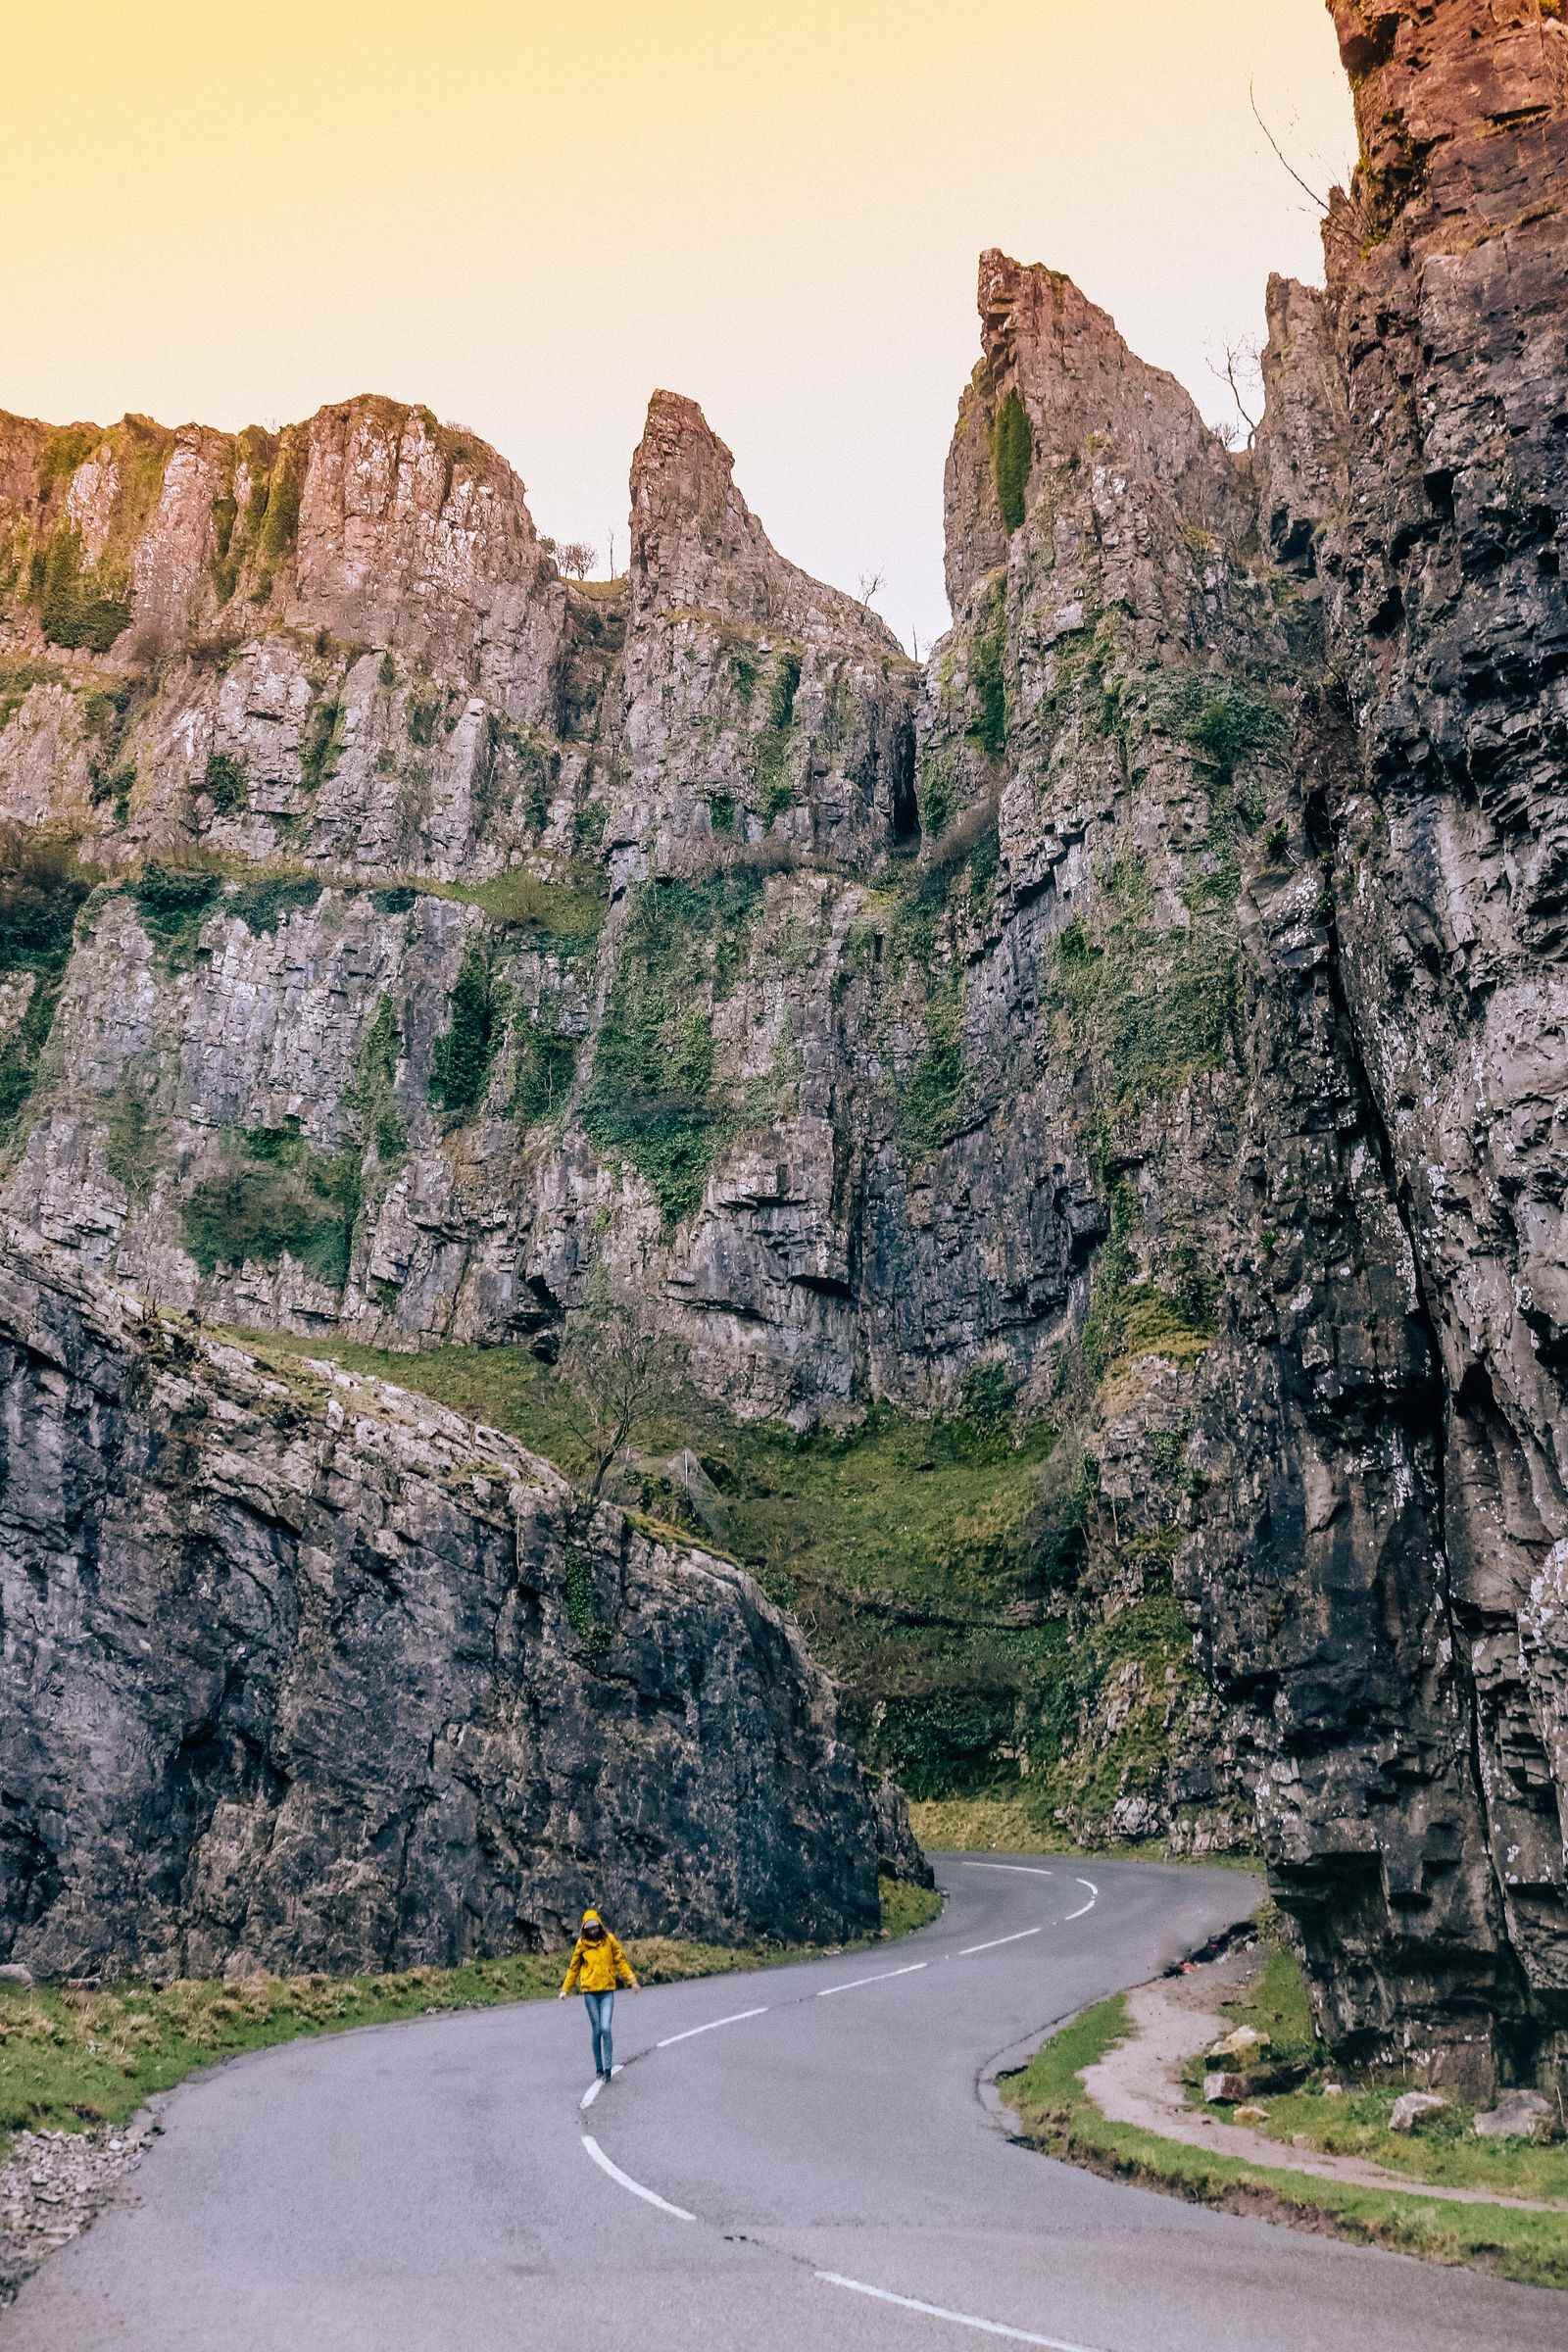 A tiny figure in a yellow coat walking down a winding road in Cheddar Gorge, tall craggy cliffs rise steep on either side